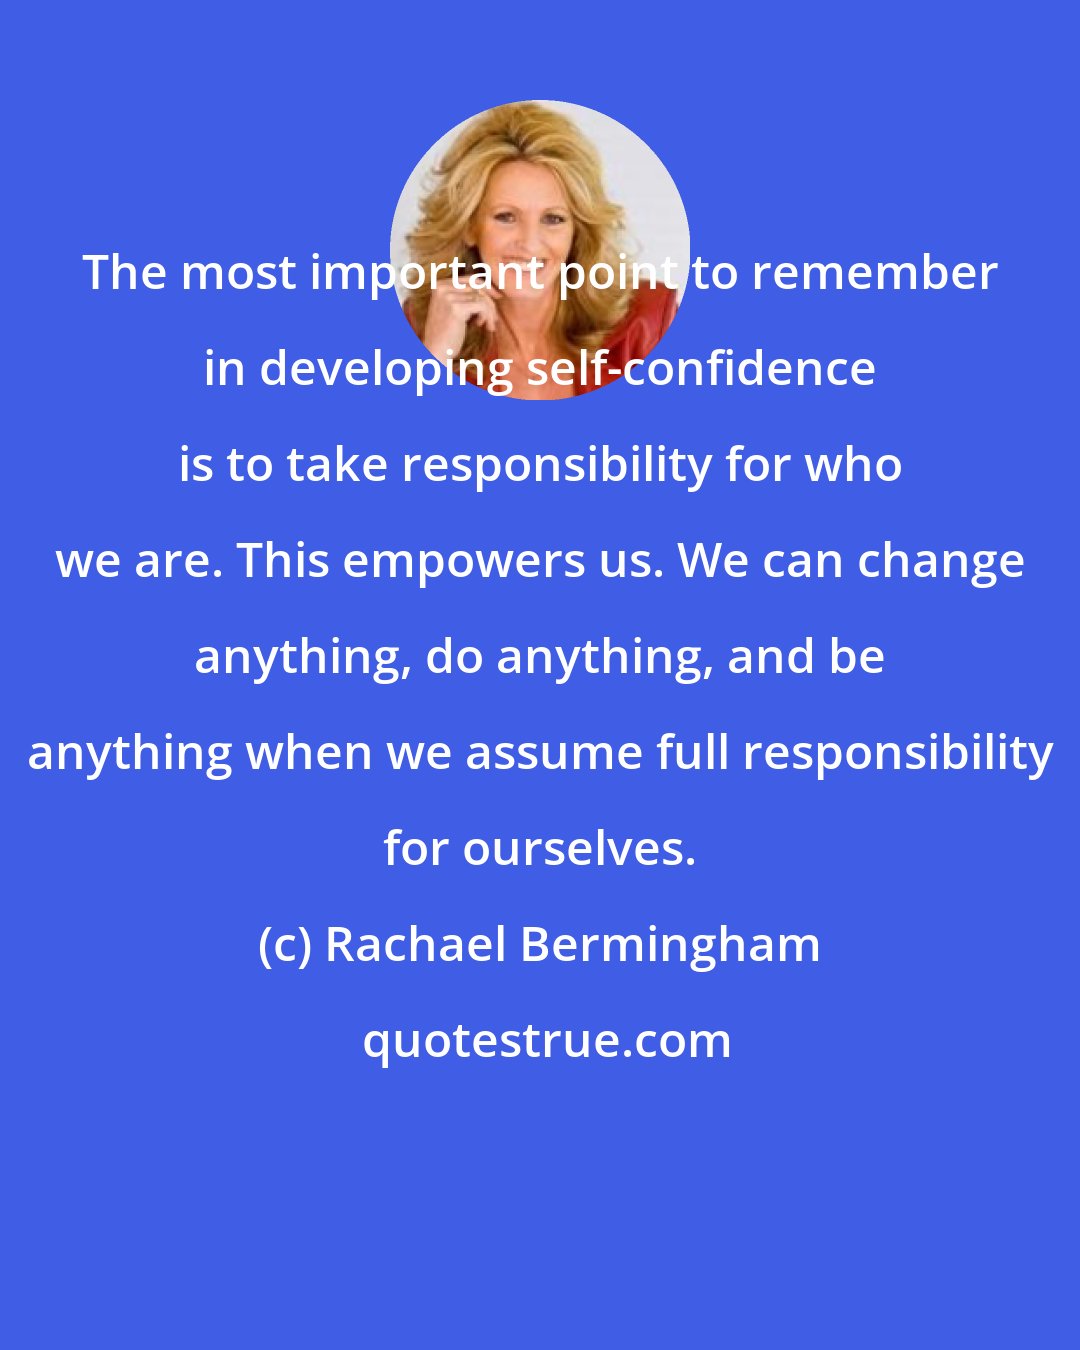 Rachael Bermingham: The most important point to remember in developing self-confidence is to take responsibility for who we are. This empowers us. We can change anything, do anything, and be anything when we assume full responsibility for ourselves.